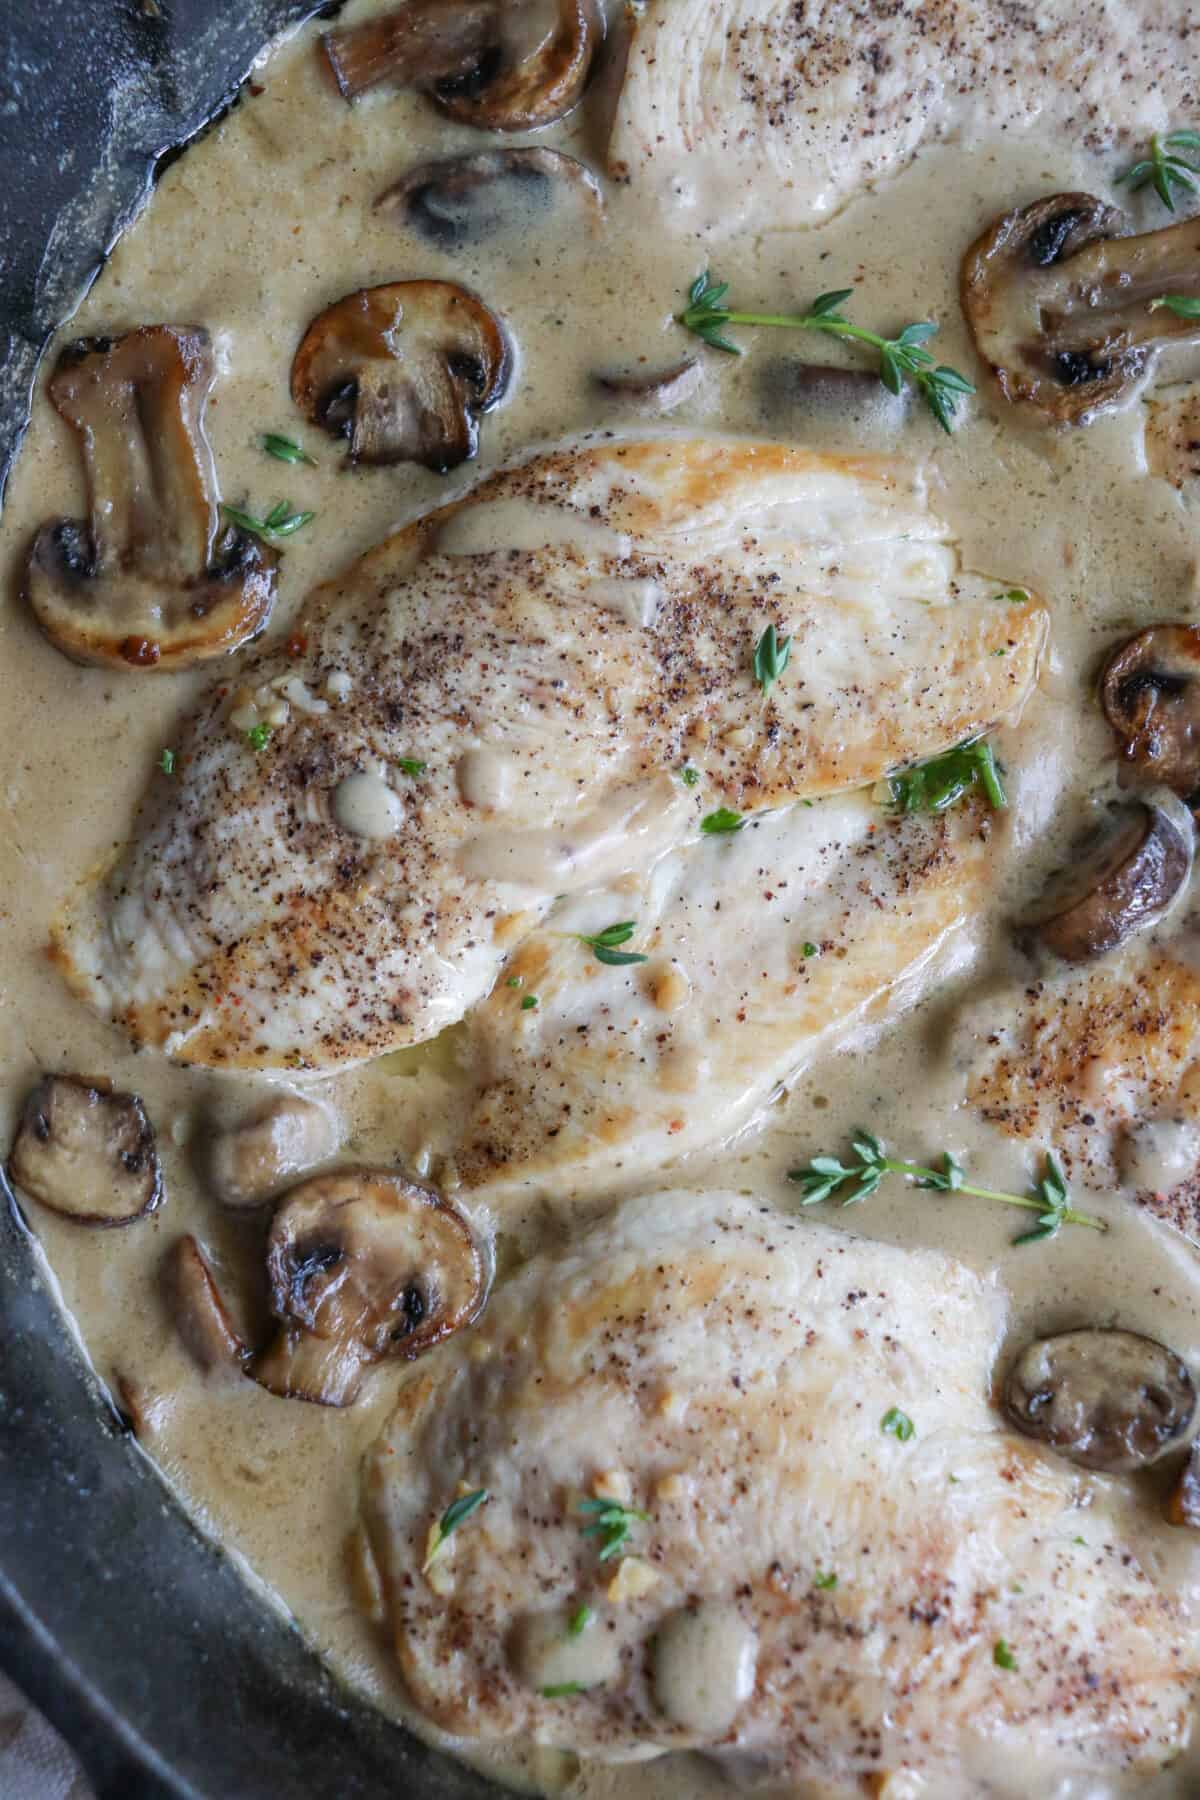 Cooked chicken breast covered in a cream sauce with mushrooms in a cast iron skillet.